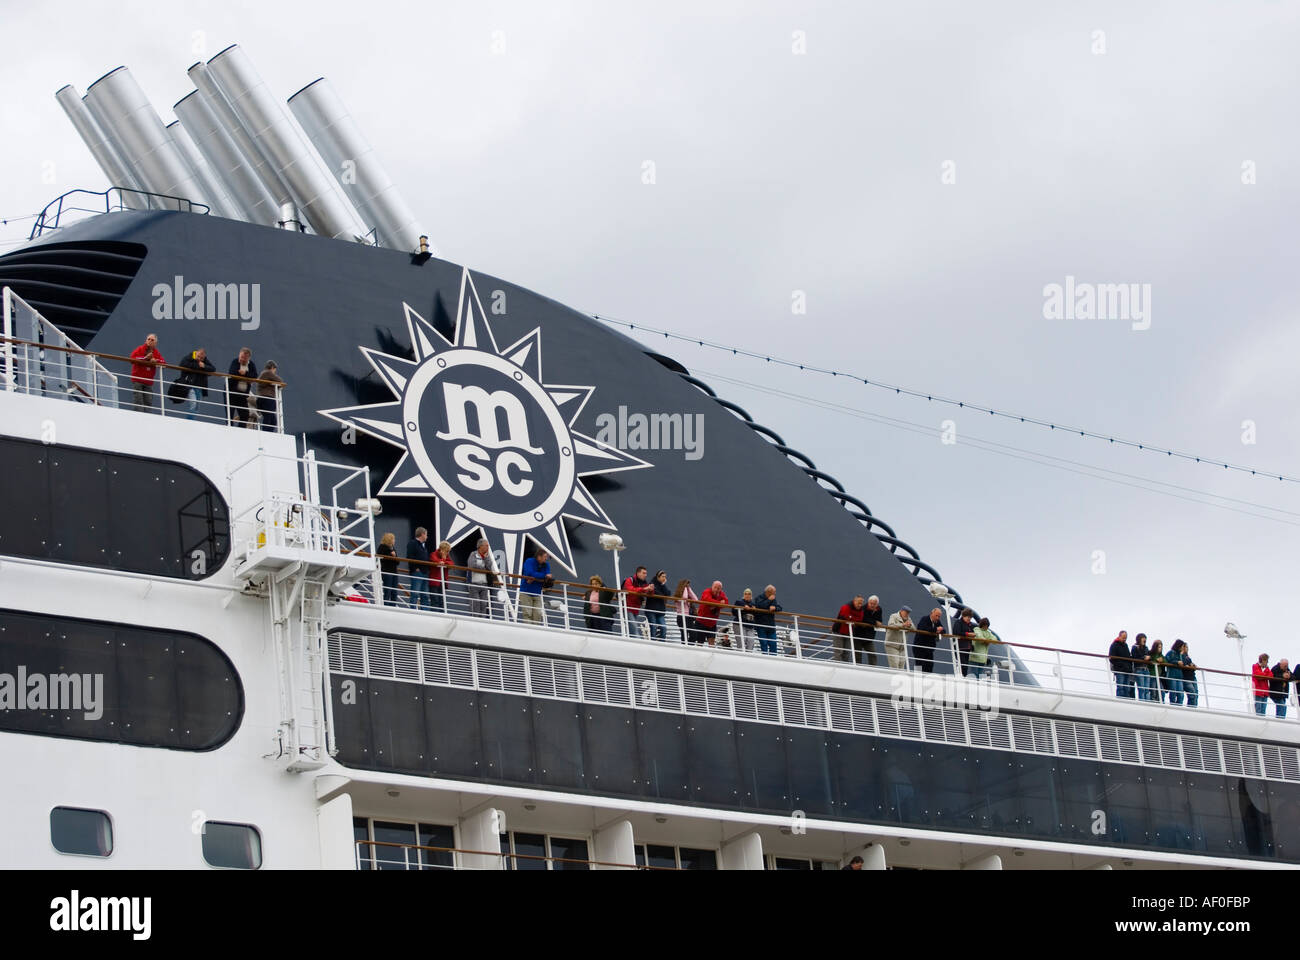 Cruise liner MSC OPERA docking in Oslo harbour, Norway August 2007 Stock Photo